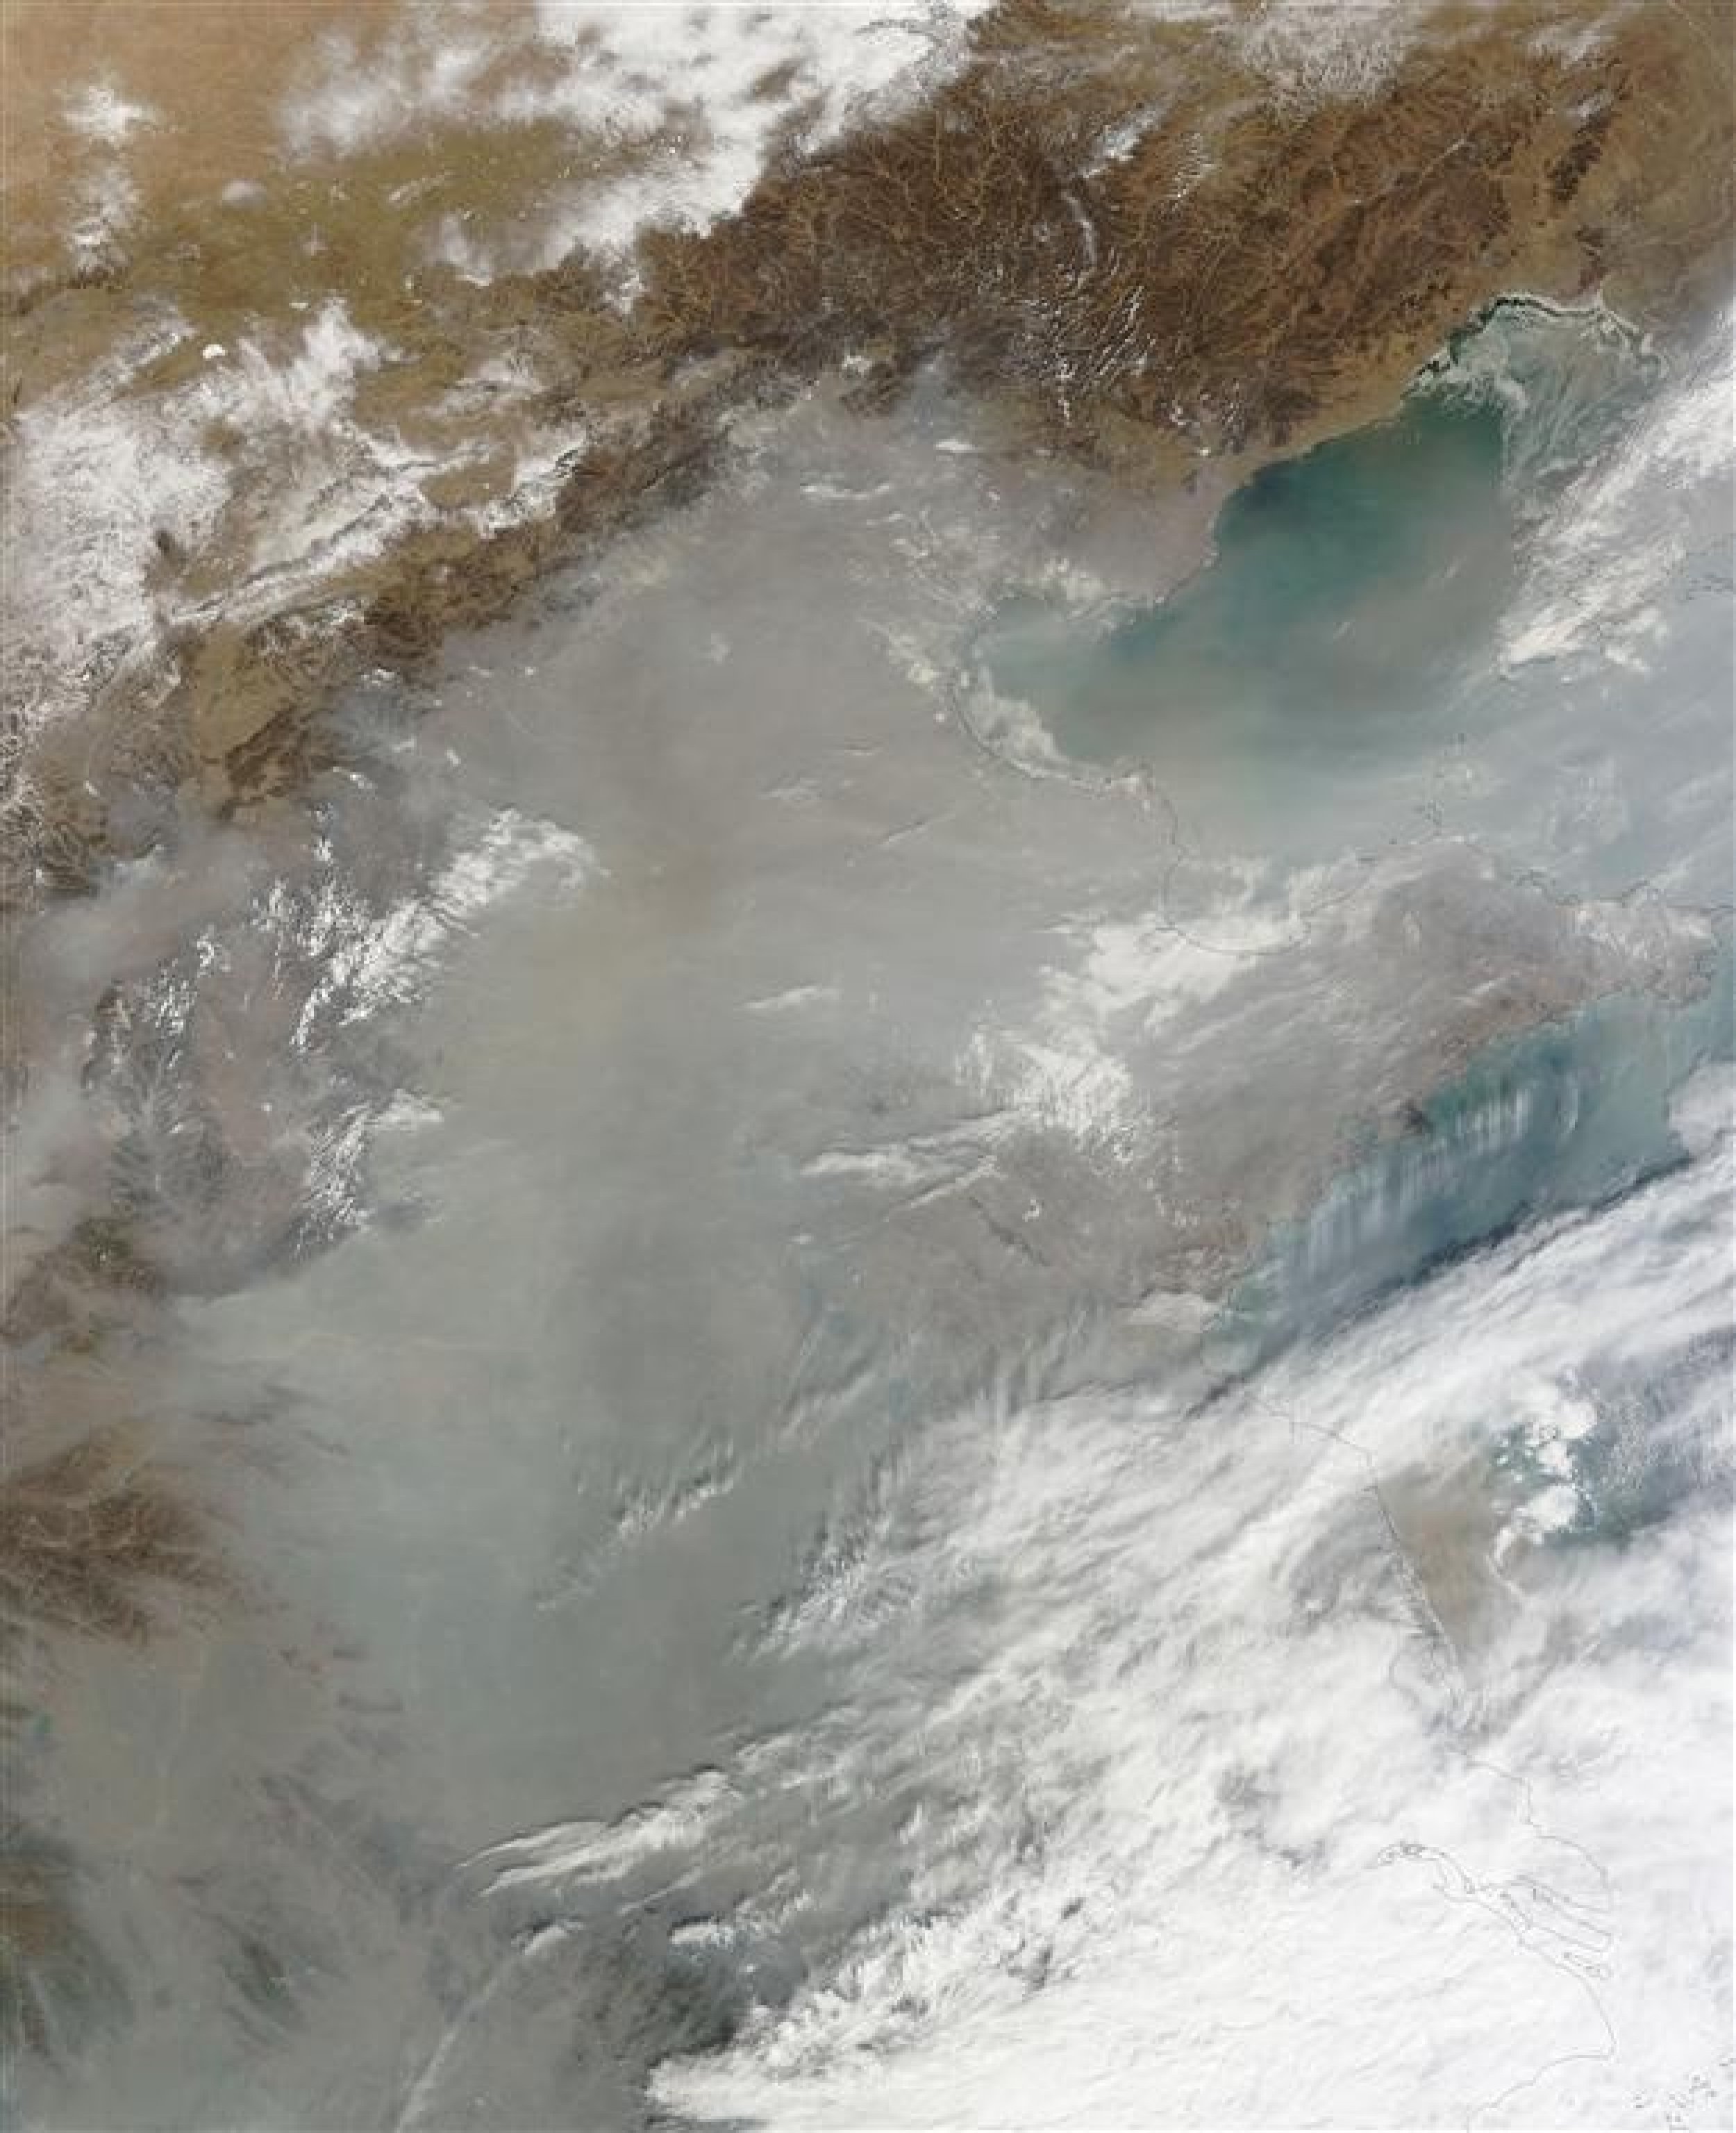 Eastern China blanketed by haze